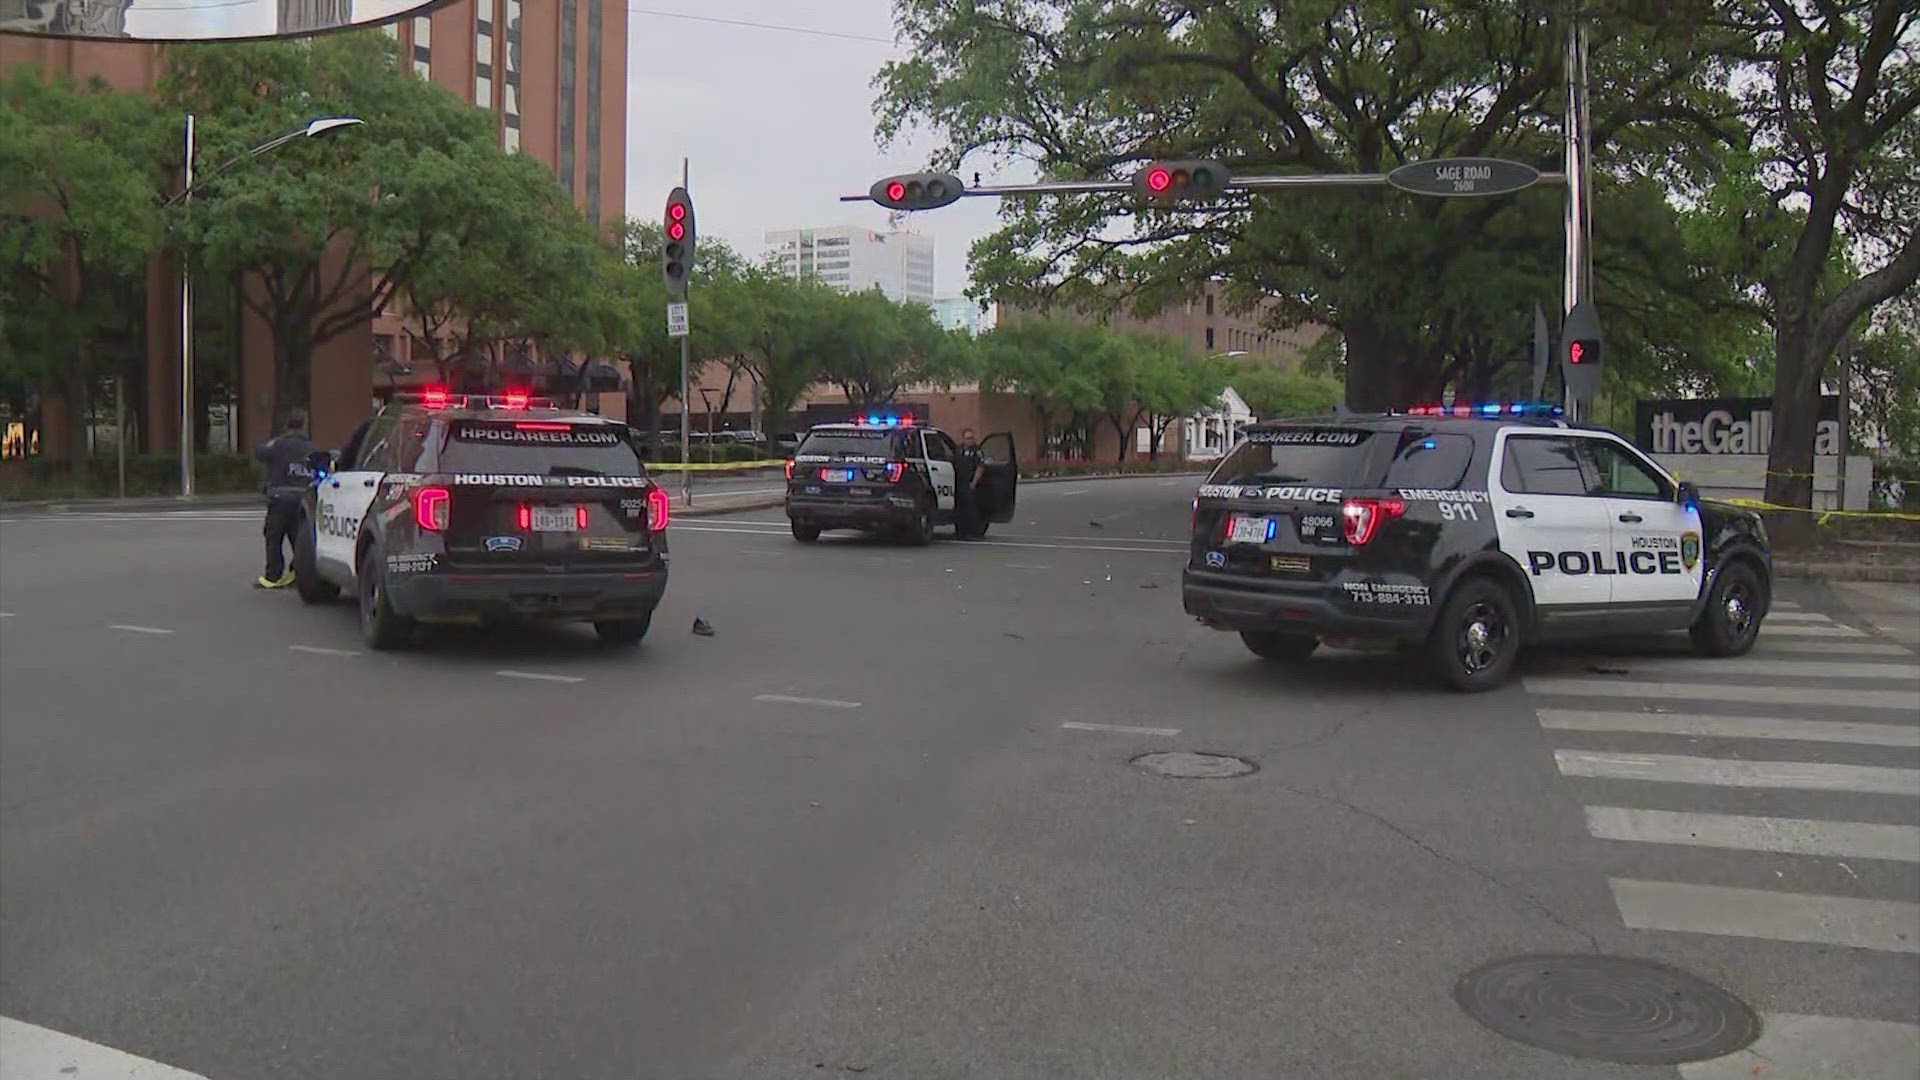 It happened around 7:30 a.m. on Westheimer near Sage Road. The man was rushed to the hospital but he didn't survive.